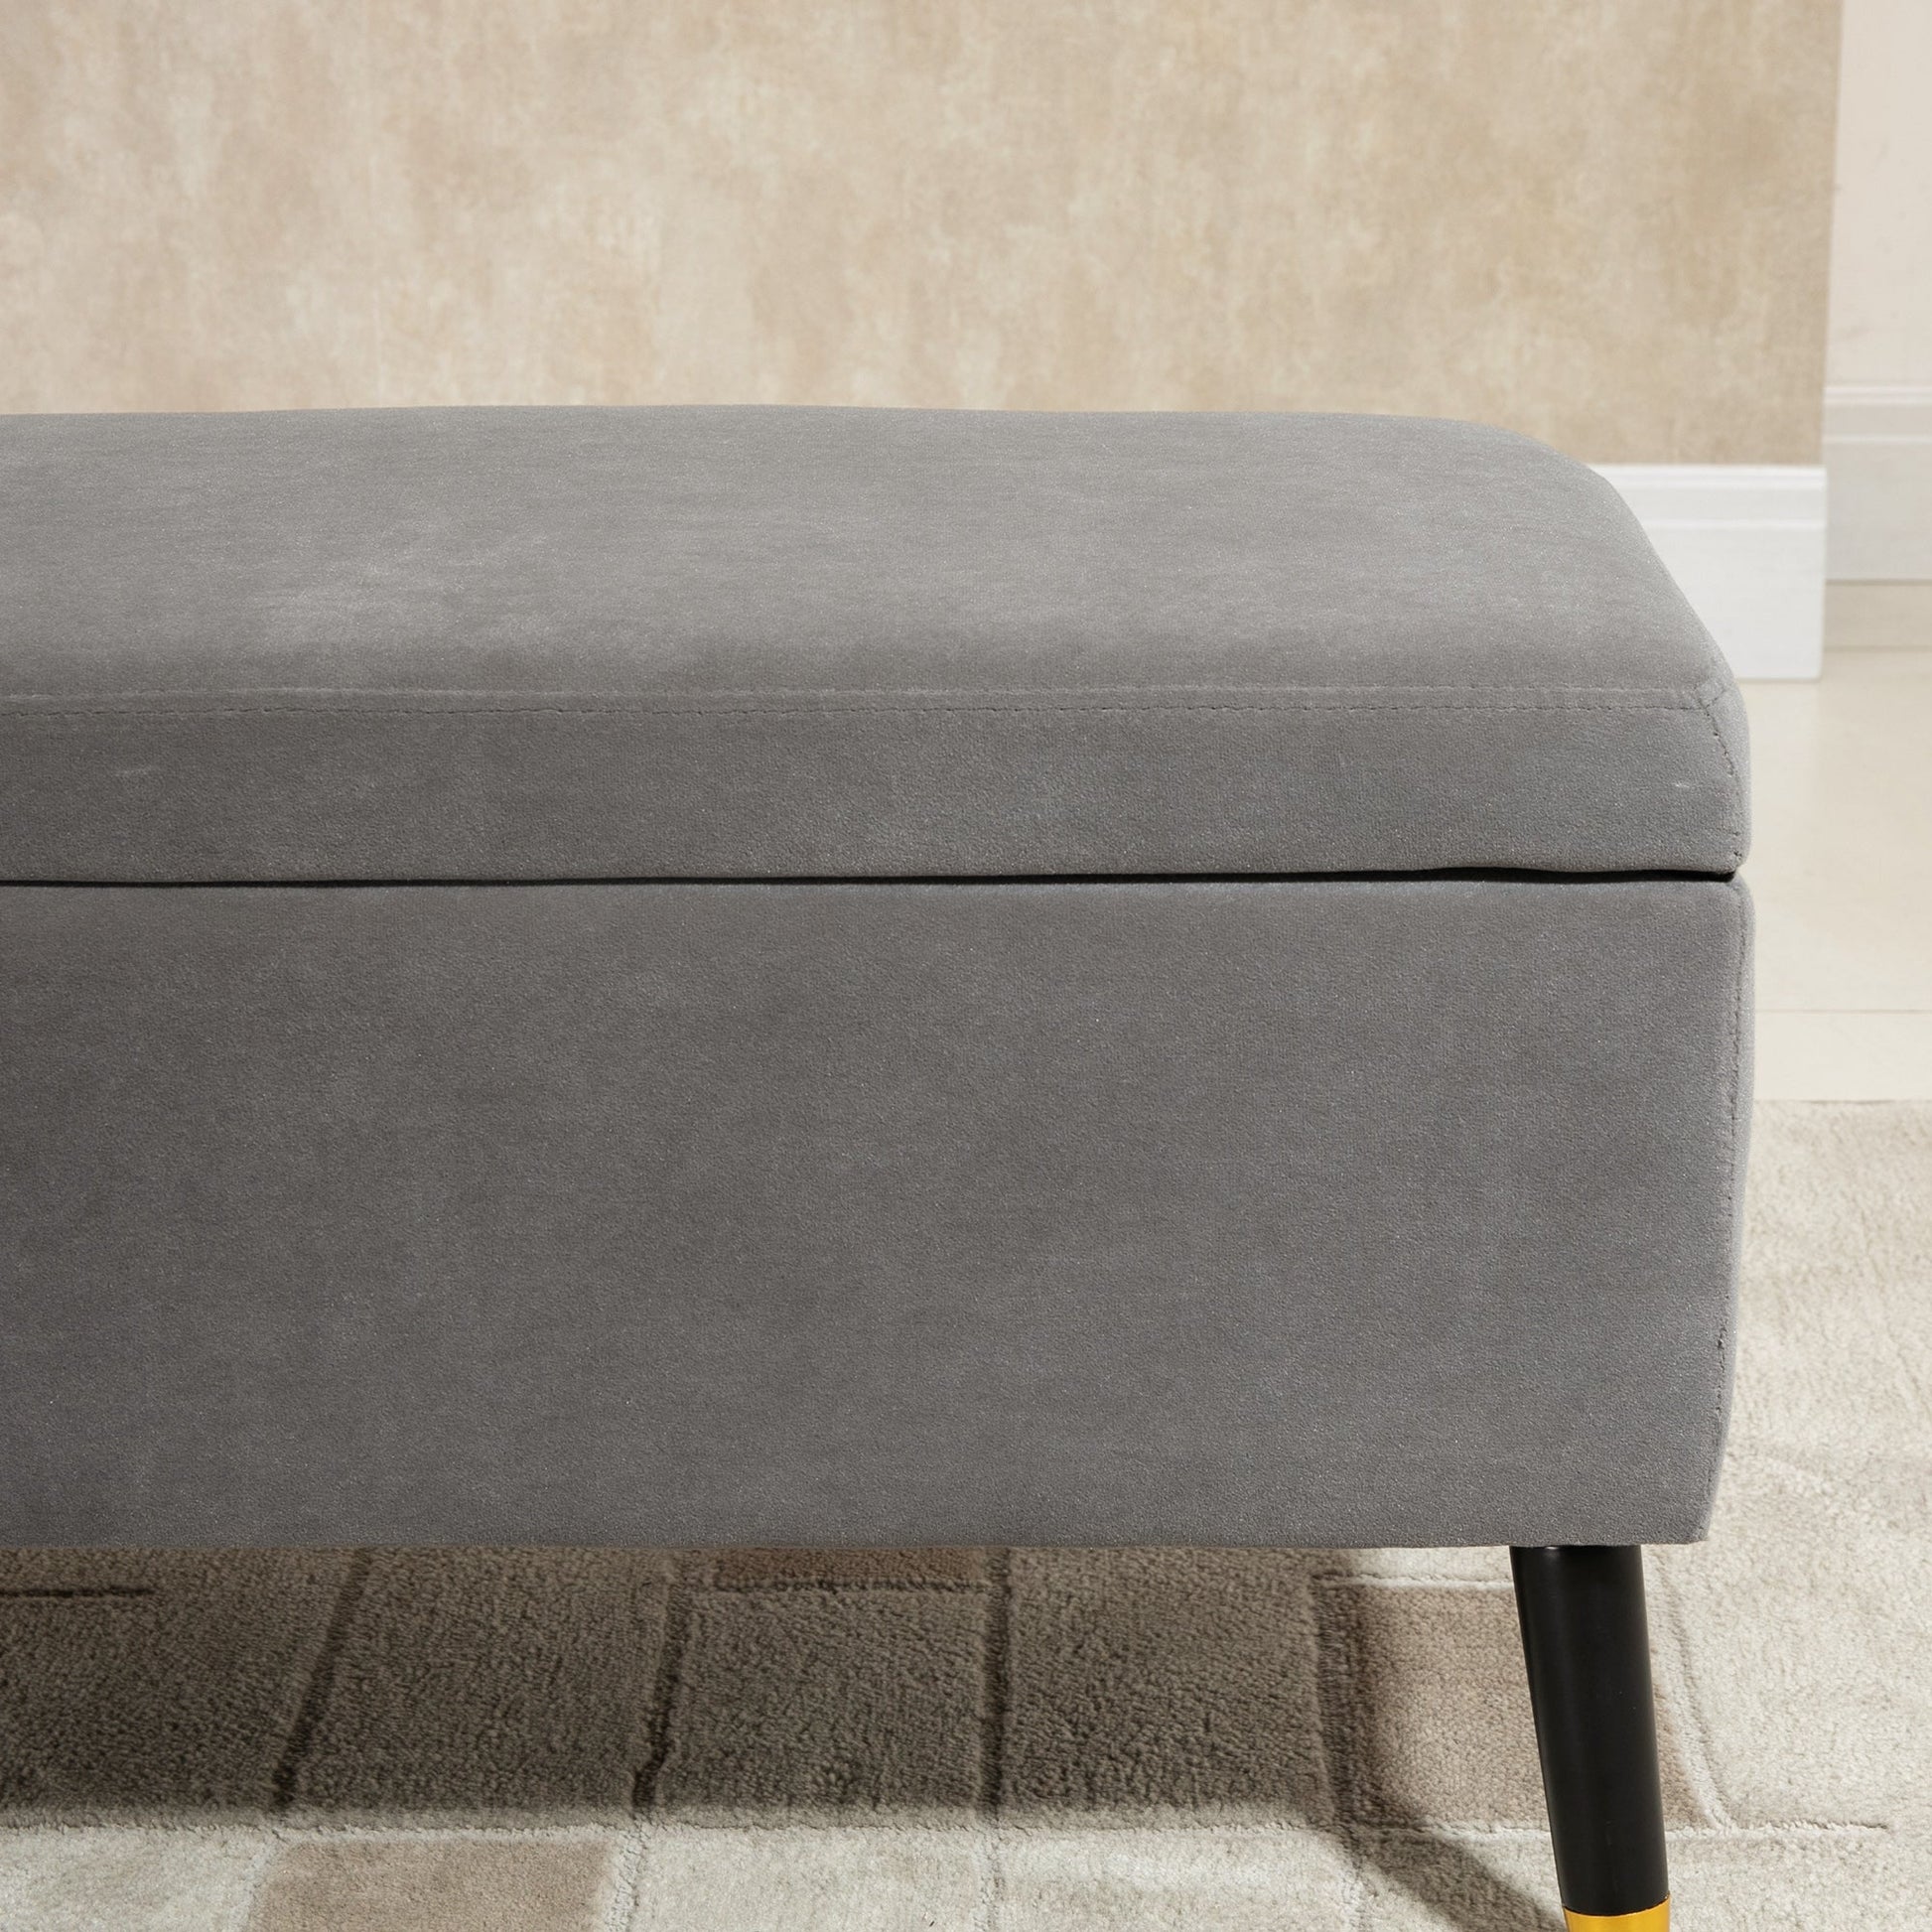 Ottoman Bench with Storage, Fabric Footrest Shoe Bench with Hinged Lid, Lift Top Bed Bench for Entryway Living Room, Charcoal Grey at Gallery Canada